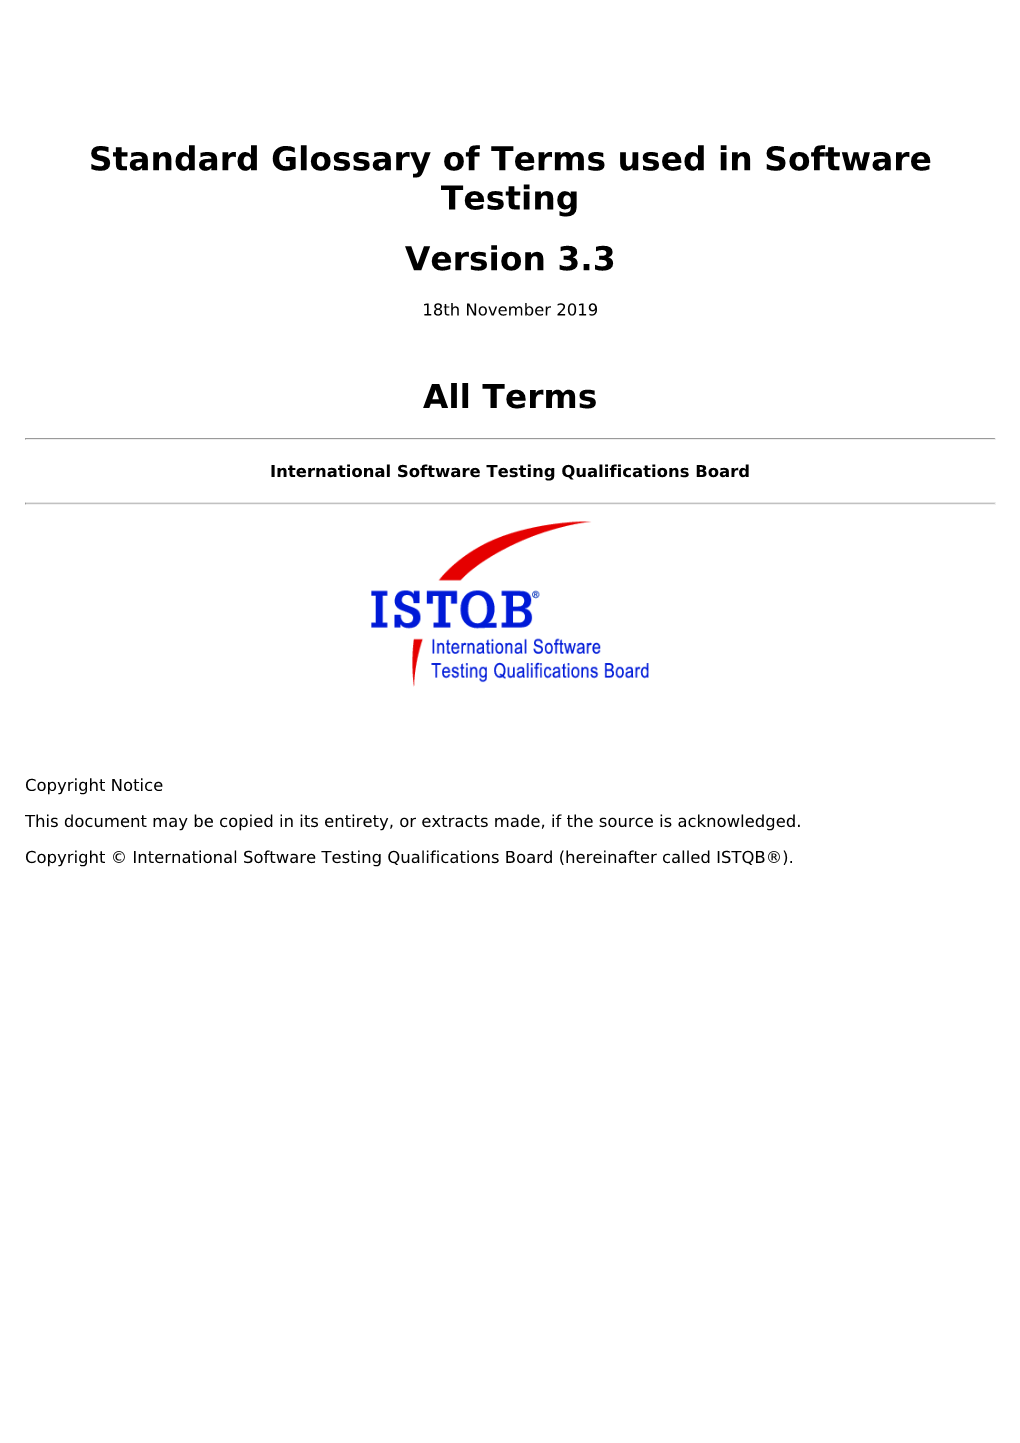 Standard Glossary of Terms Used in Software Testing Version 3.3 All